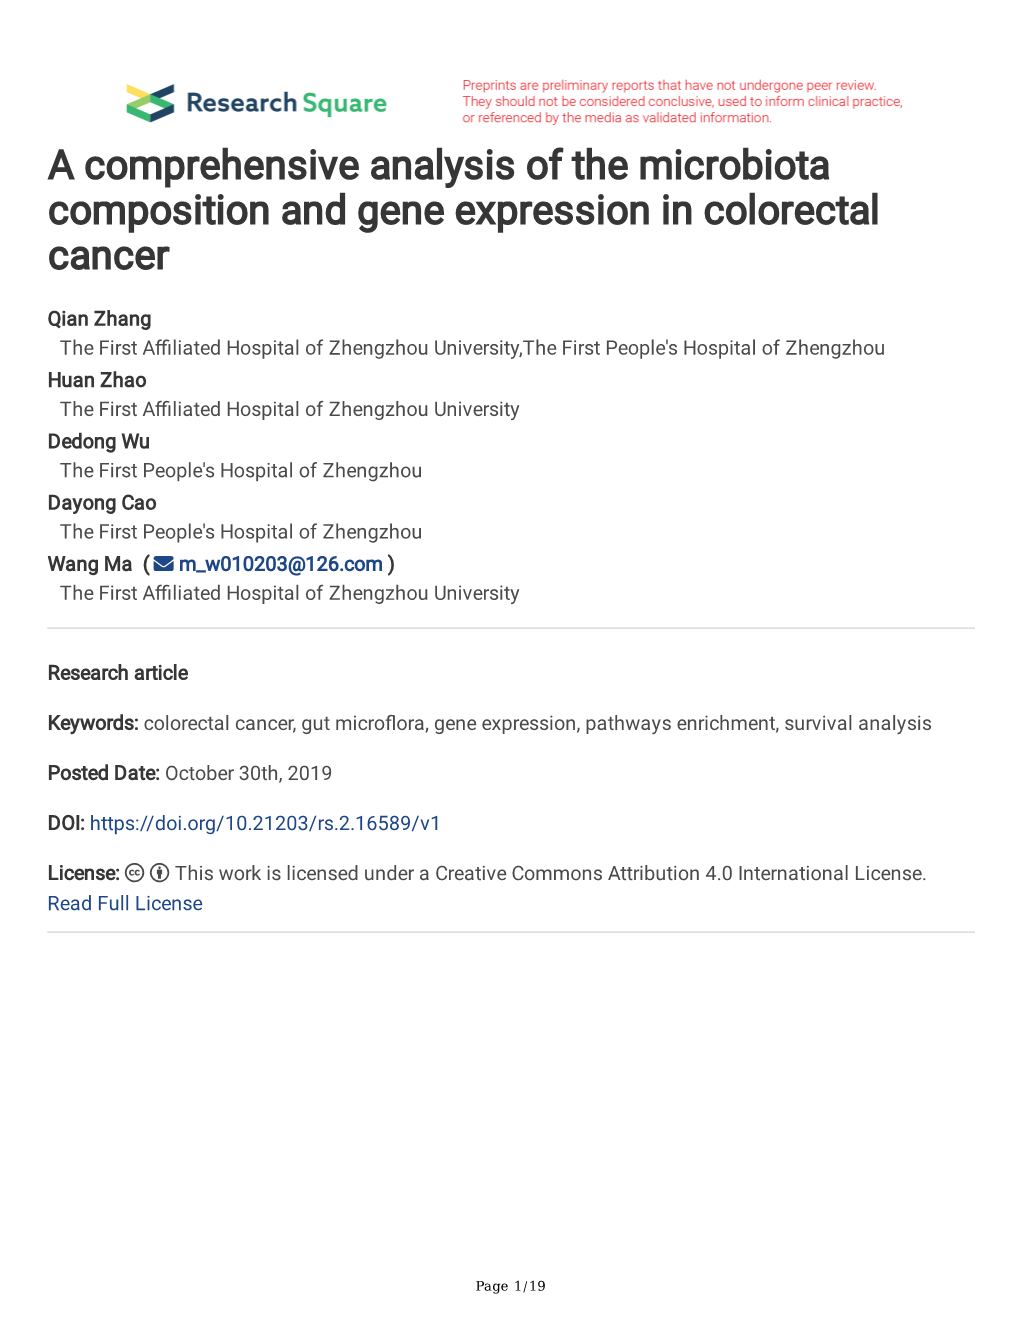 A Comprehensive Analysis of the Microbiota Composition and Gene Expression in Colorectal Cancer